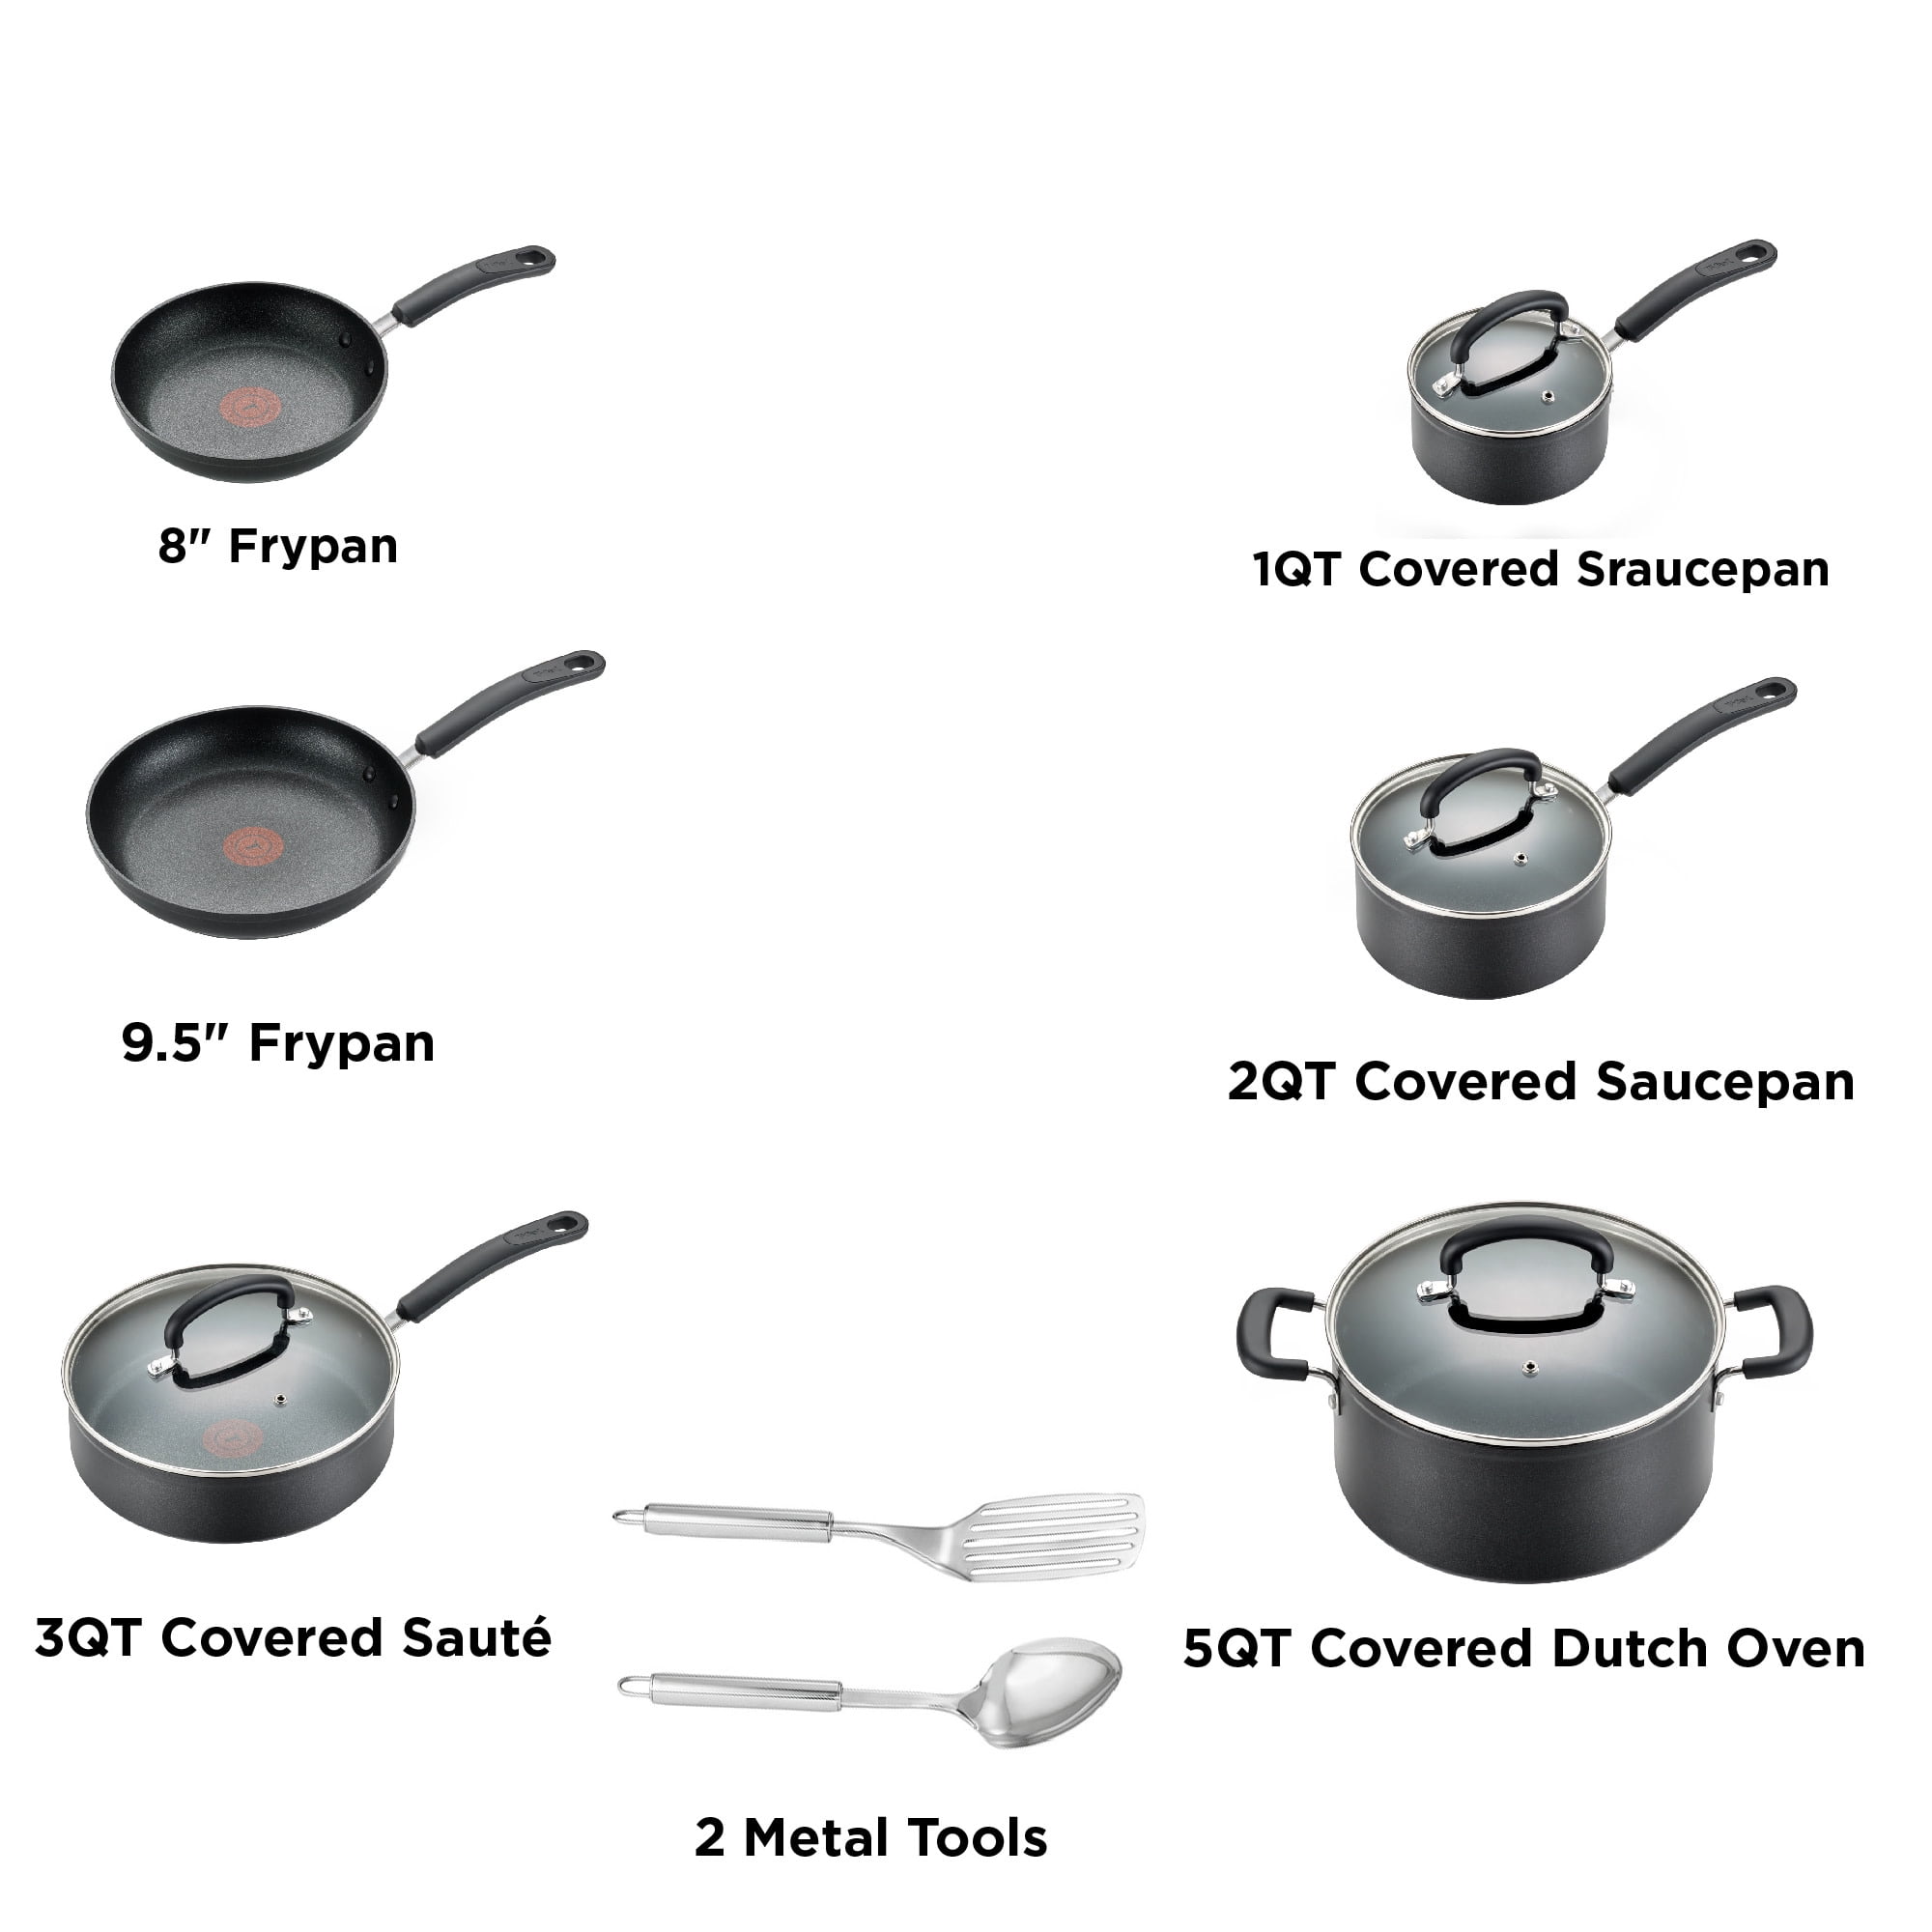 T-Fal C561SC64 Forged 12-Piece Cookware Set - 9913204